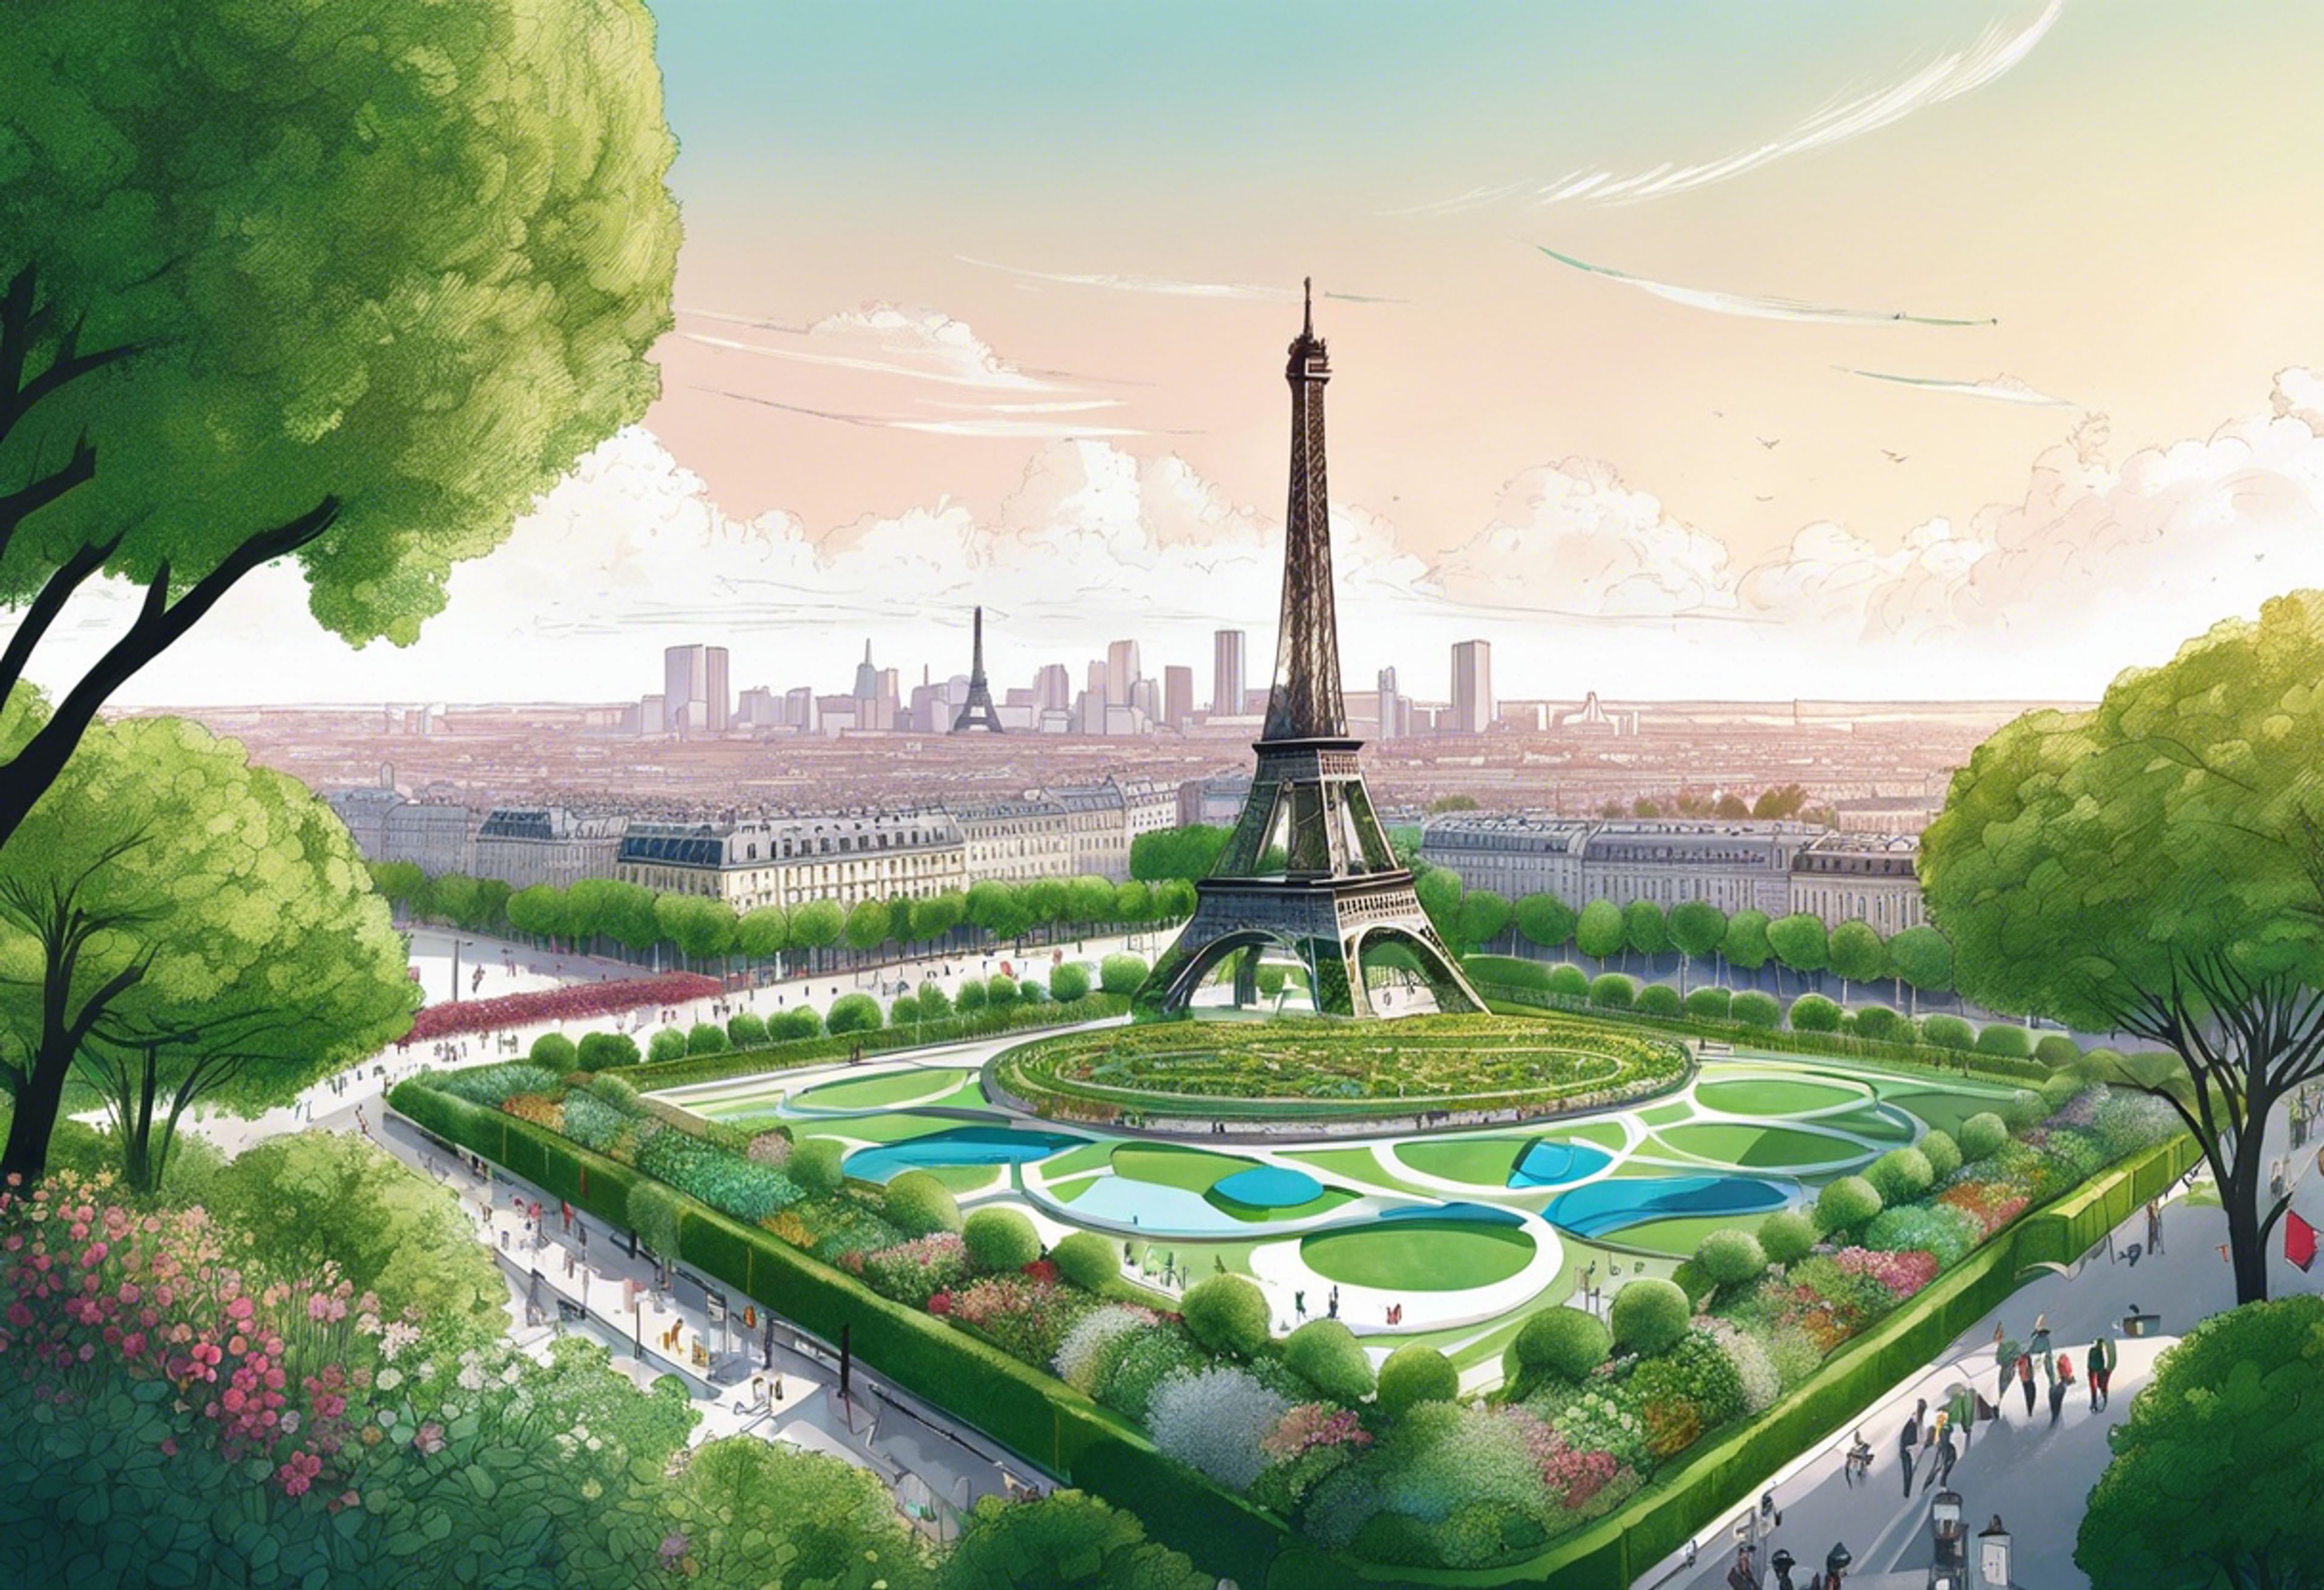 Paris Transforms into a Floral Paradise Ahead of the 2024 Olympics: A Vision of Sustainability and Beauty